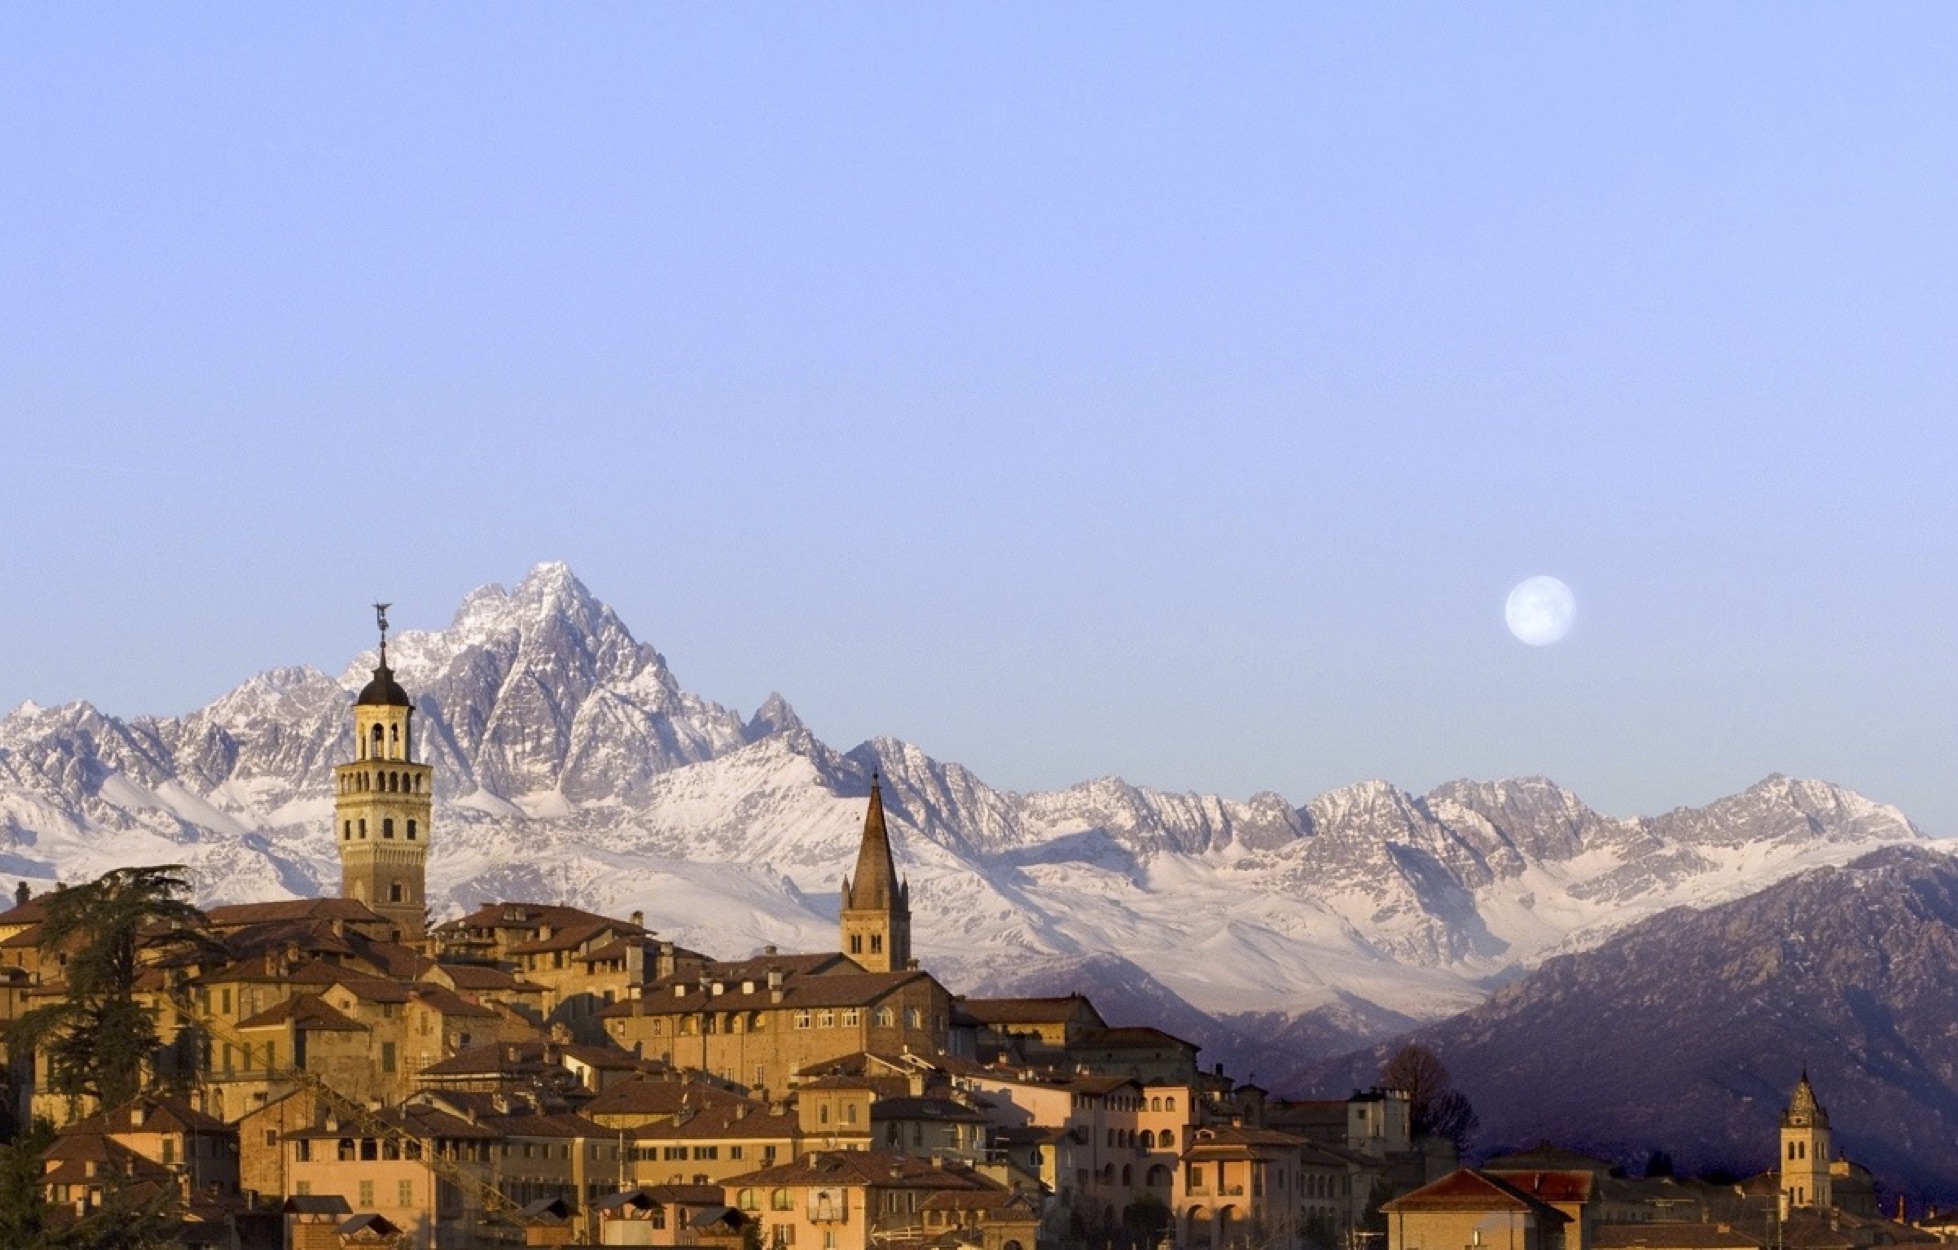 Saluzzo, Piedmont - 15 of the Prettiest Towns and Villages in Italy